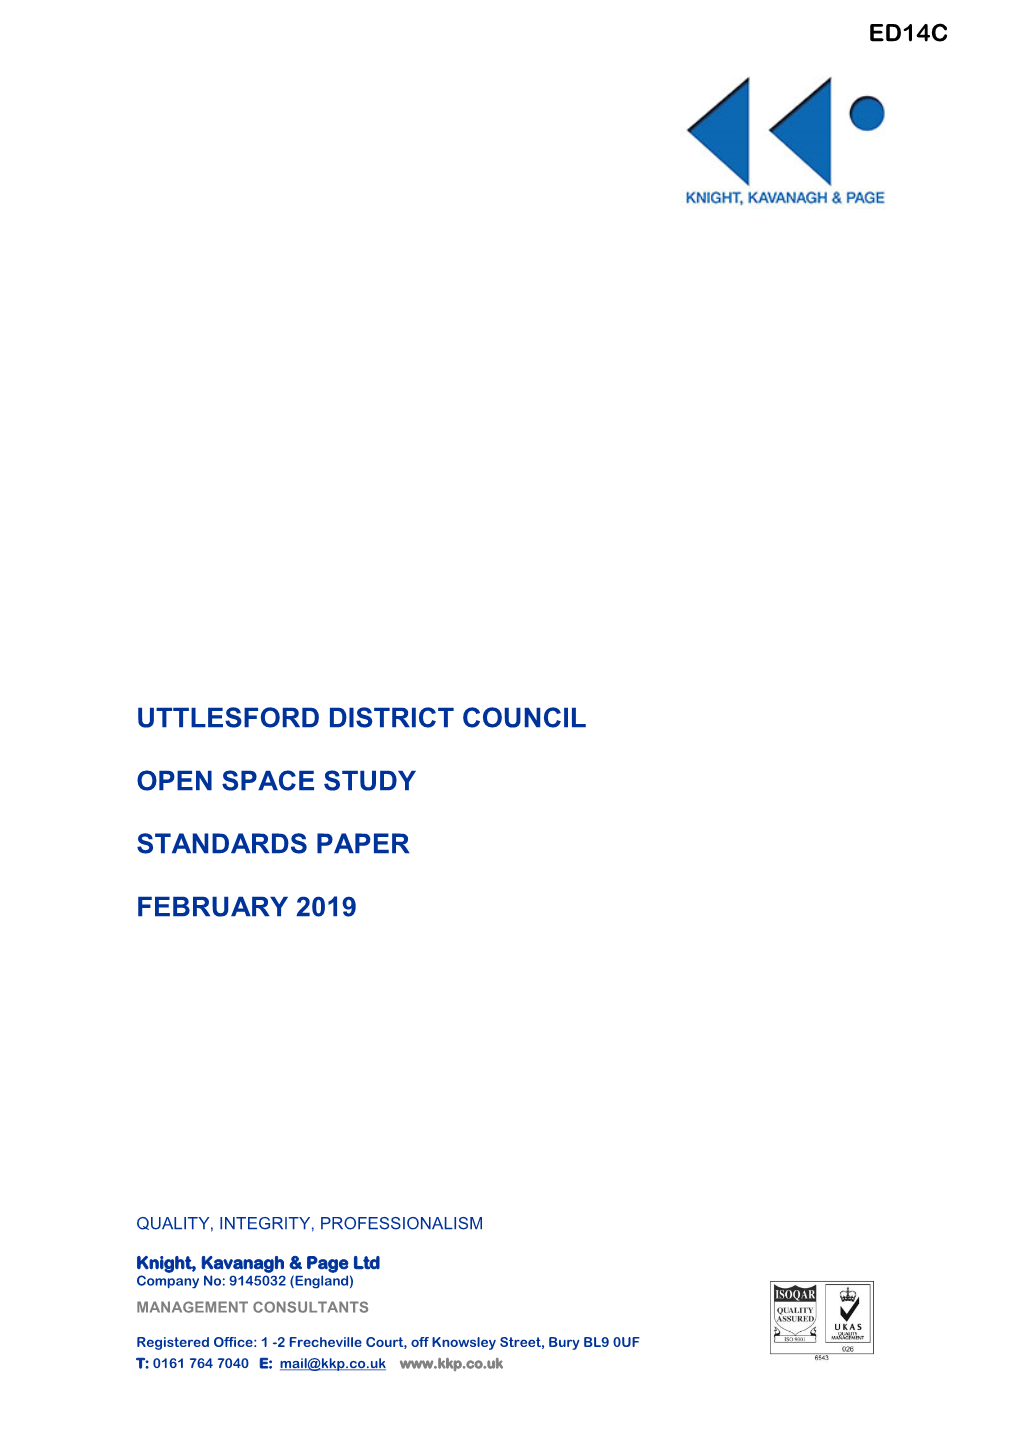 Uttlesford District Council Open Space Study Standards Paper February 2019